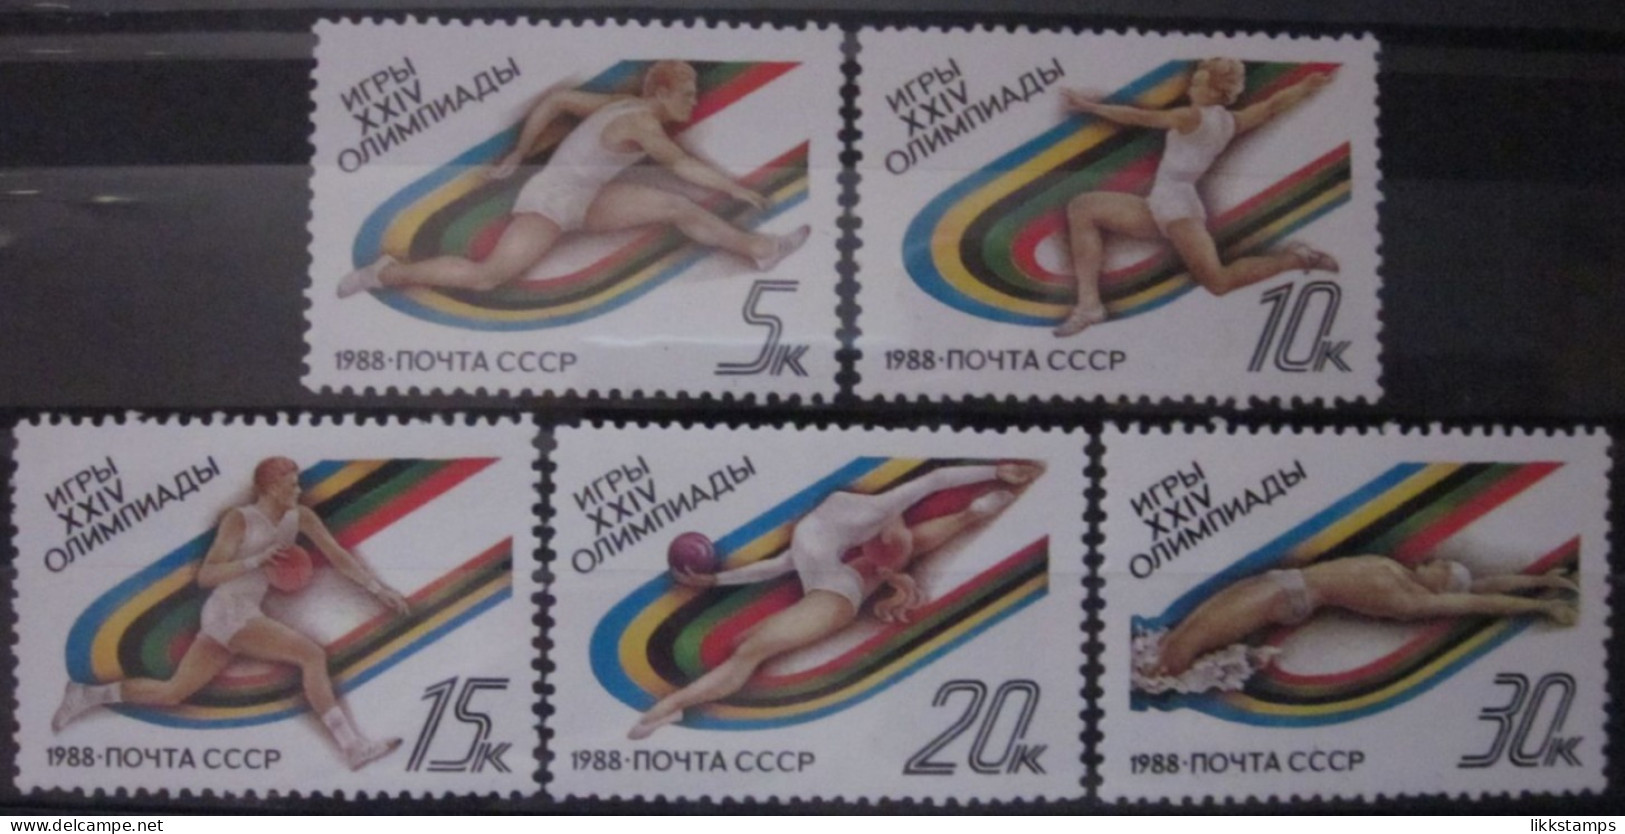 RUSSIA ~ 1988 ~ S.G. NUMBERS 5885 - 5889, OLYMPIC GAMES. ~ MNH #03654 - Neufs